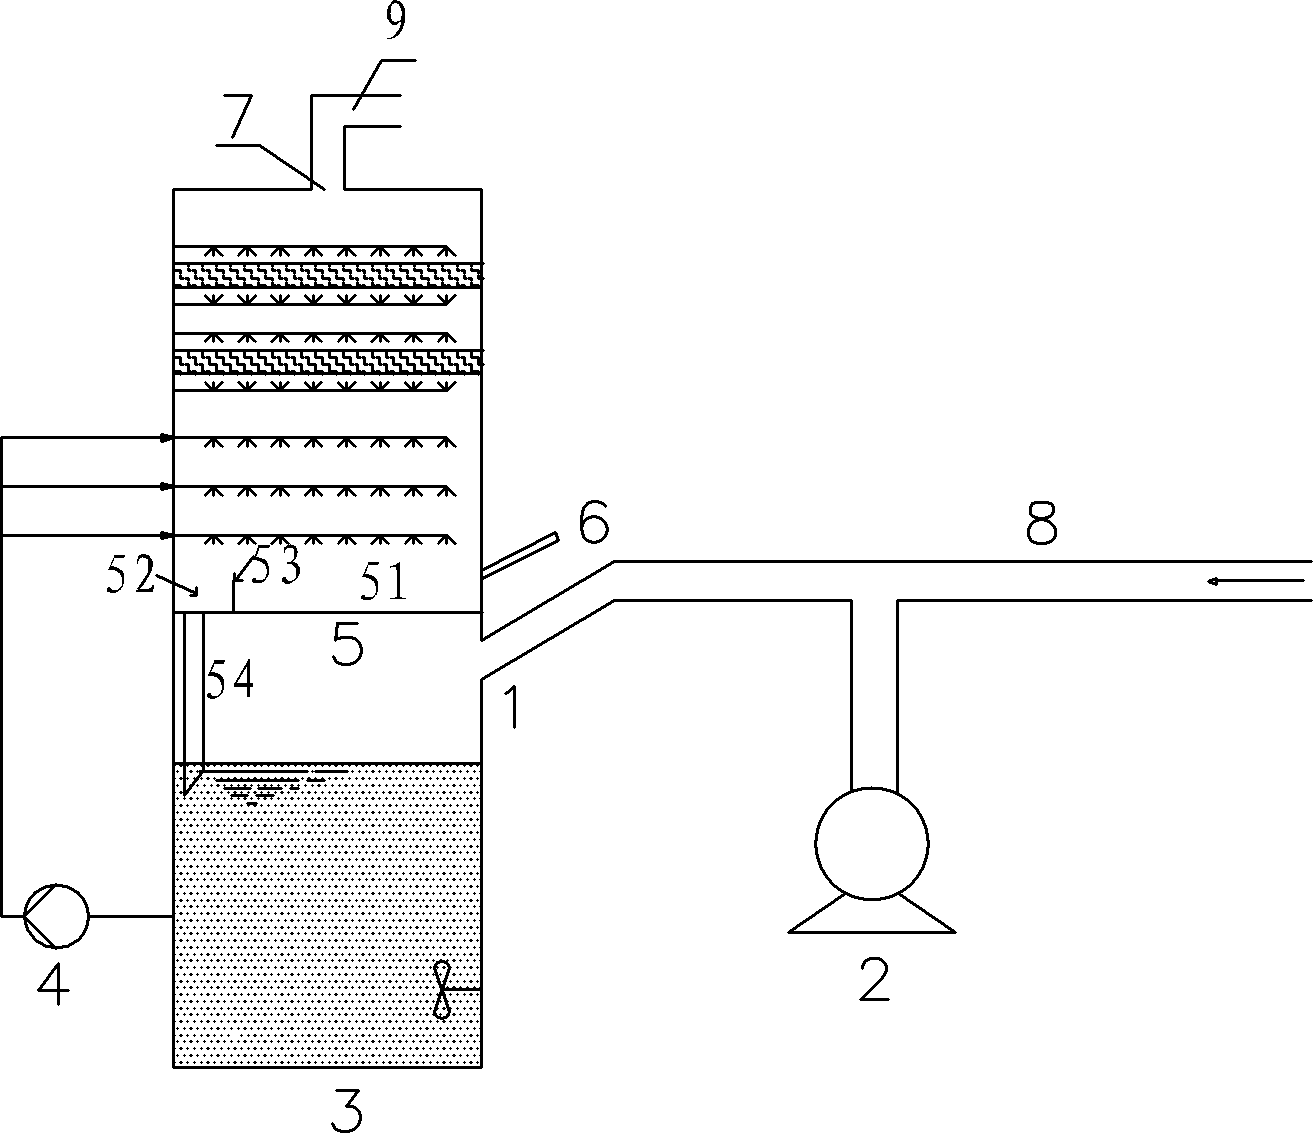 Sieve-plate tower used for sintering machine flue gas desulfurization and desulfurization process thereof